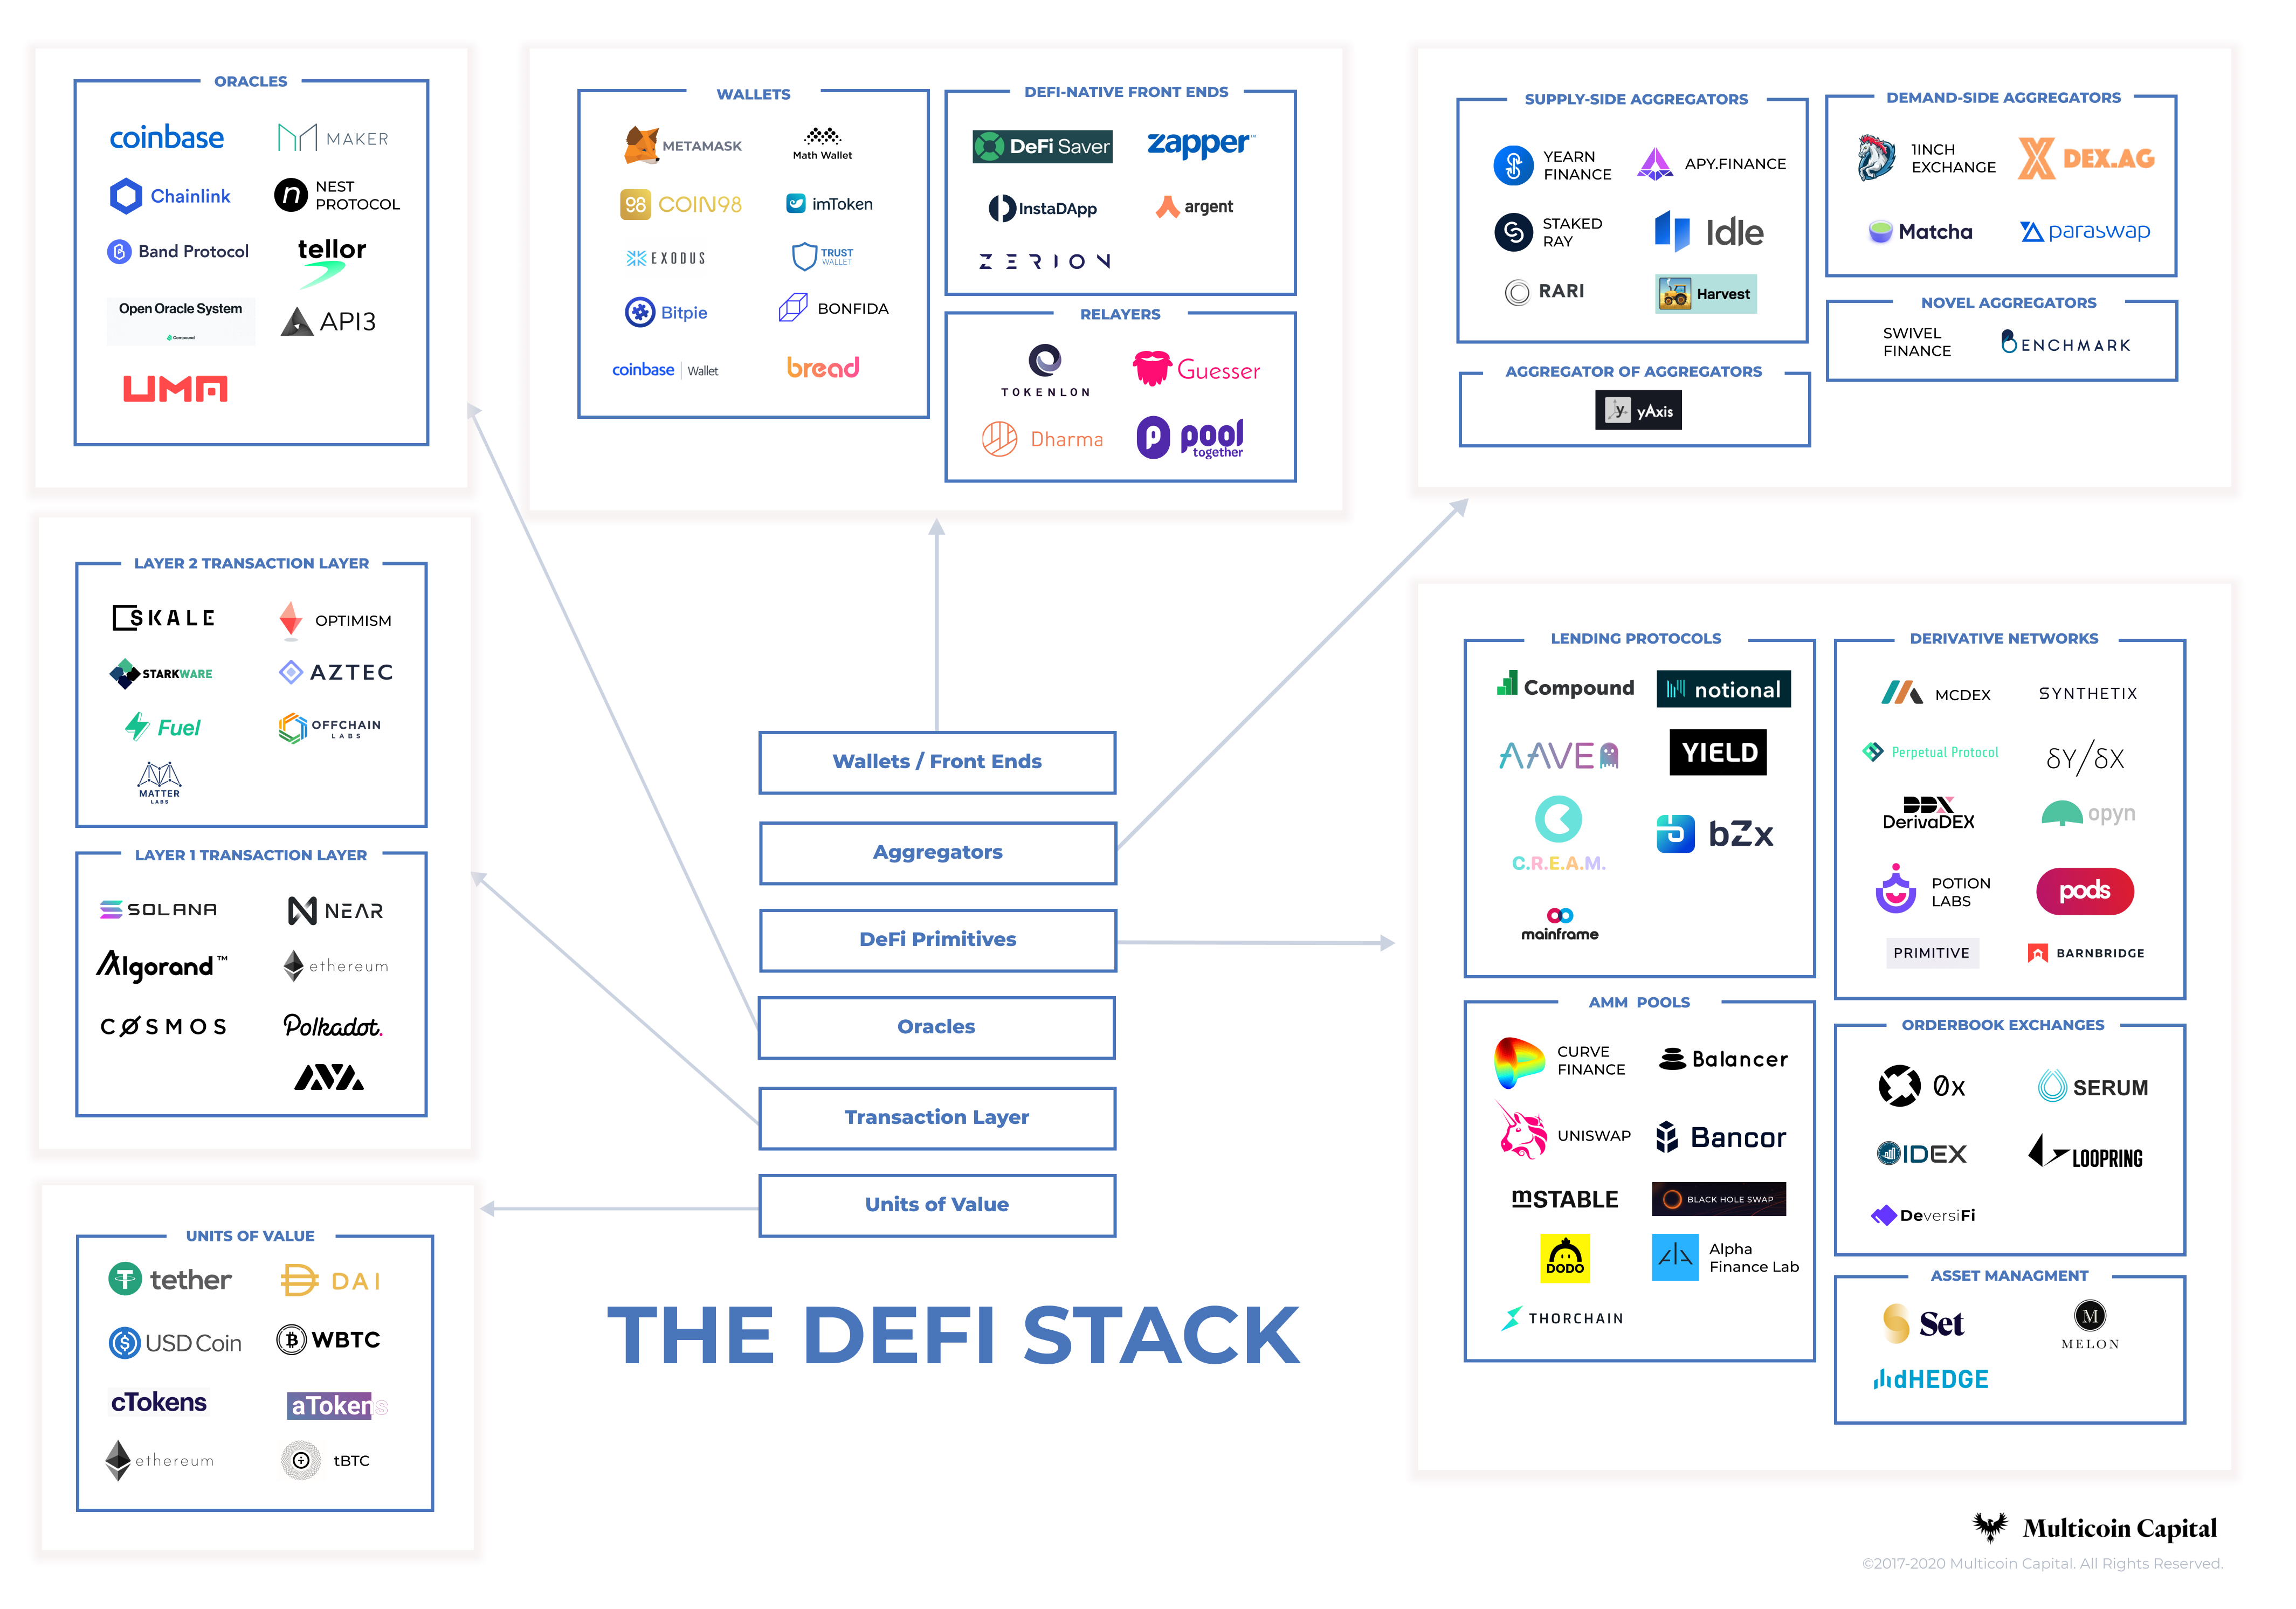 The DeFi Stack